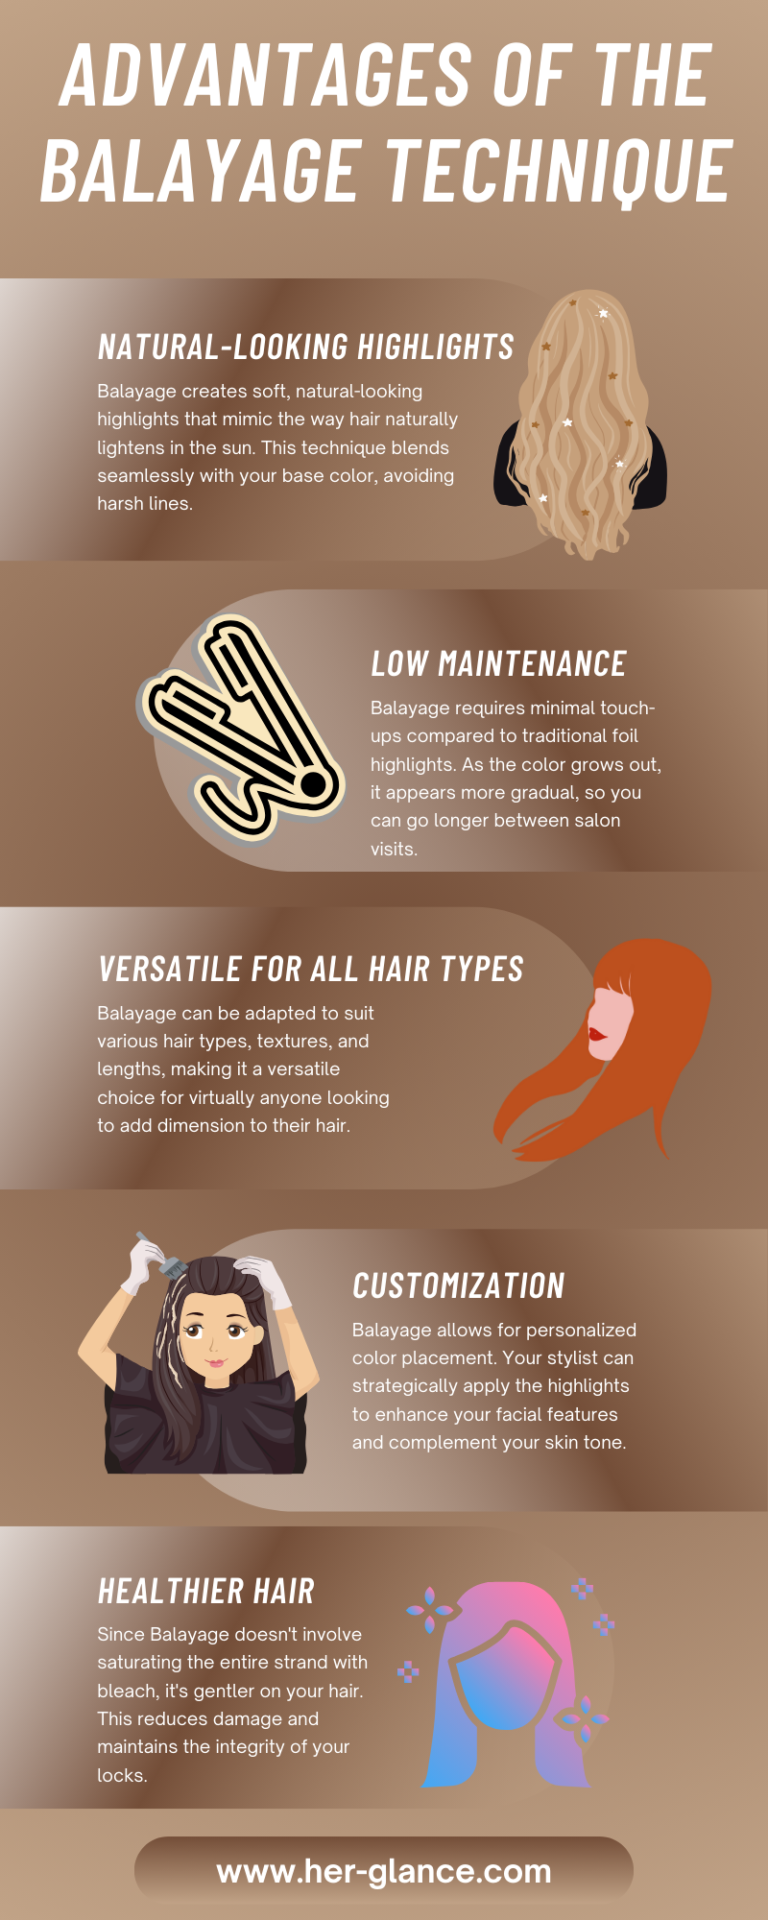 Advantages of the Balayage Technique